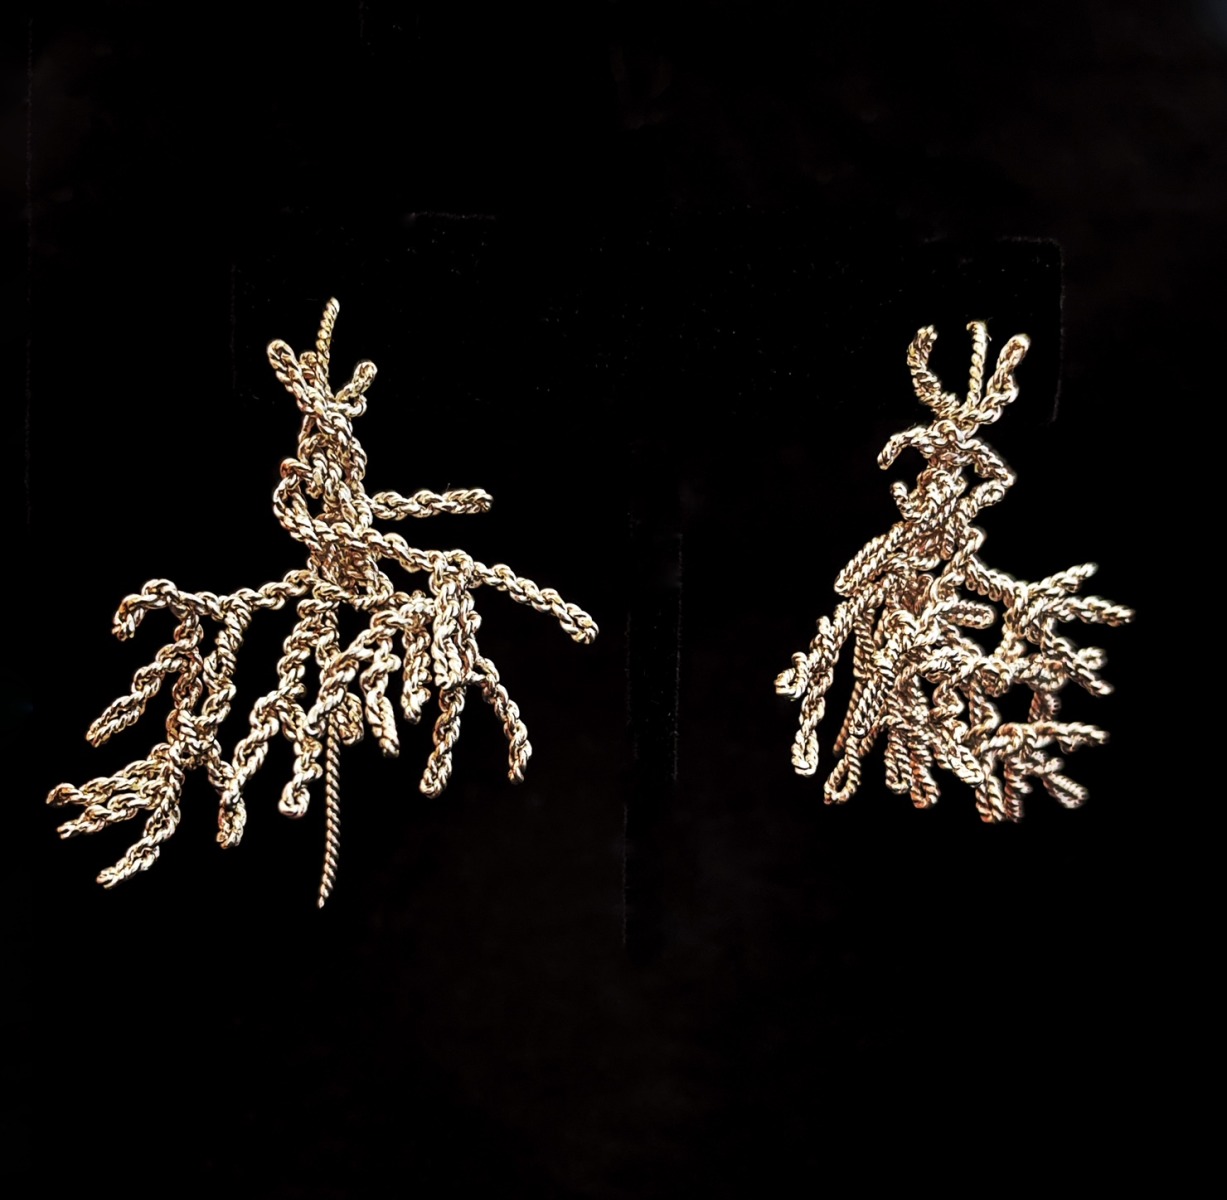 Coral Branch Earrings, large